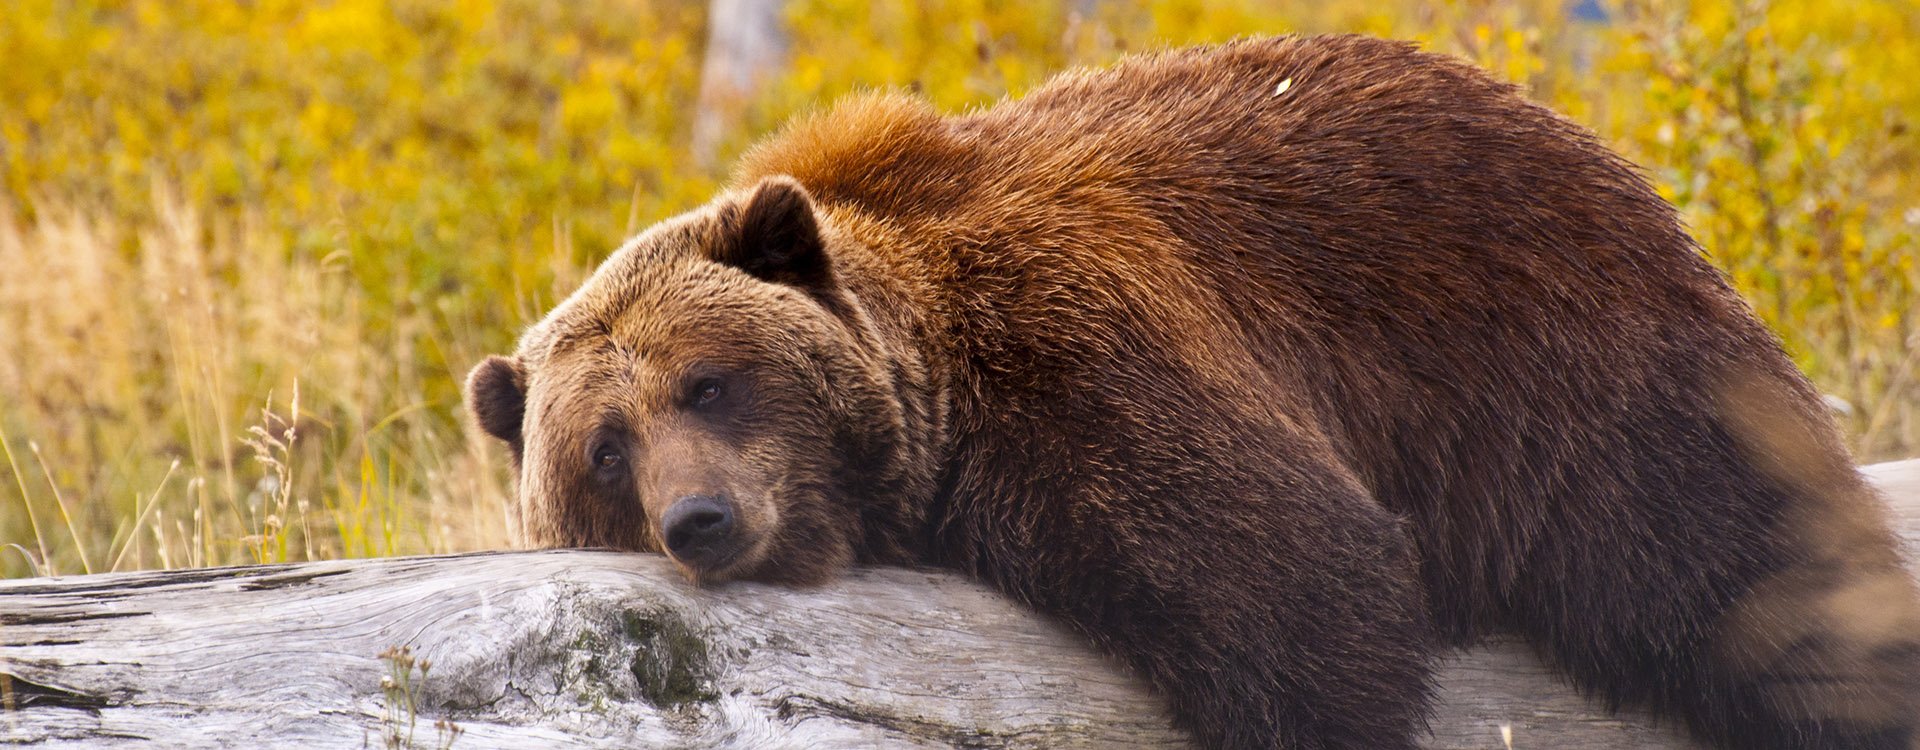 A Bear in Alaska laying down for a rest